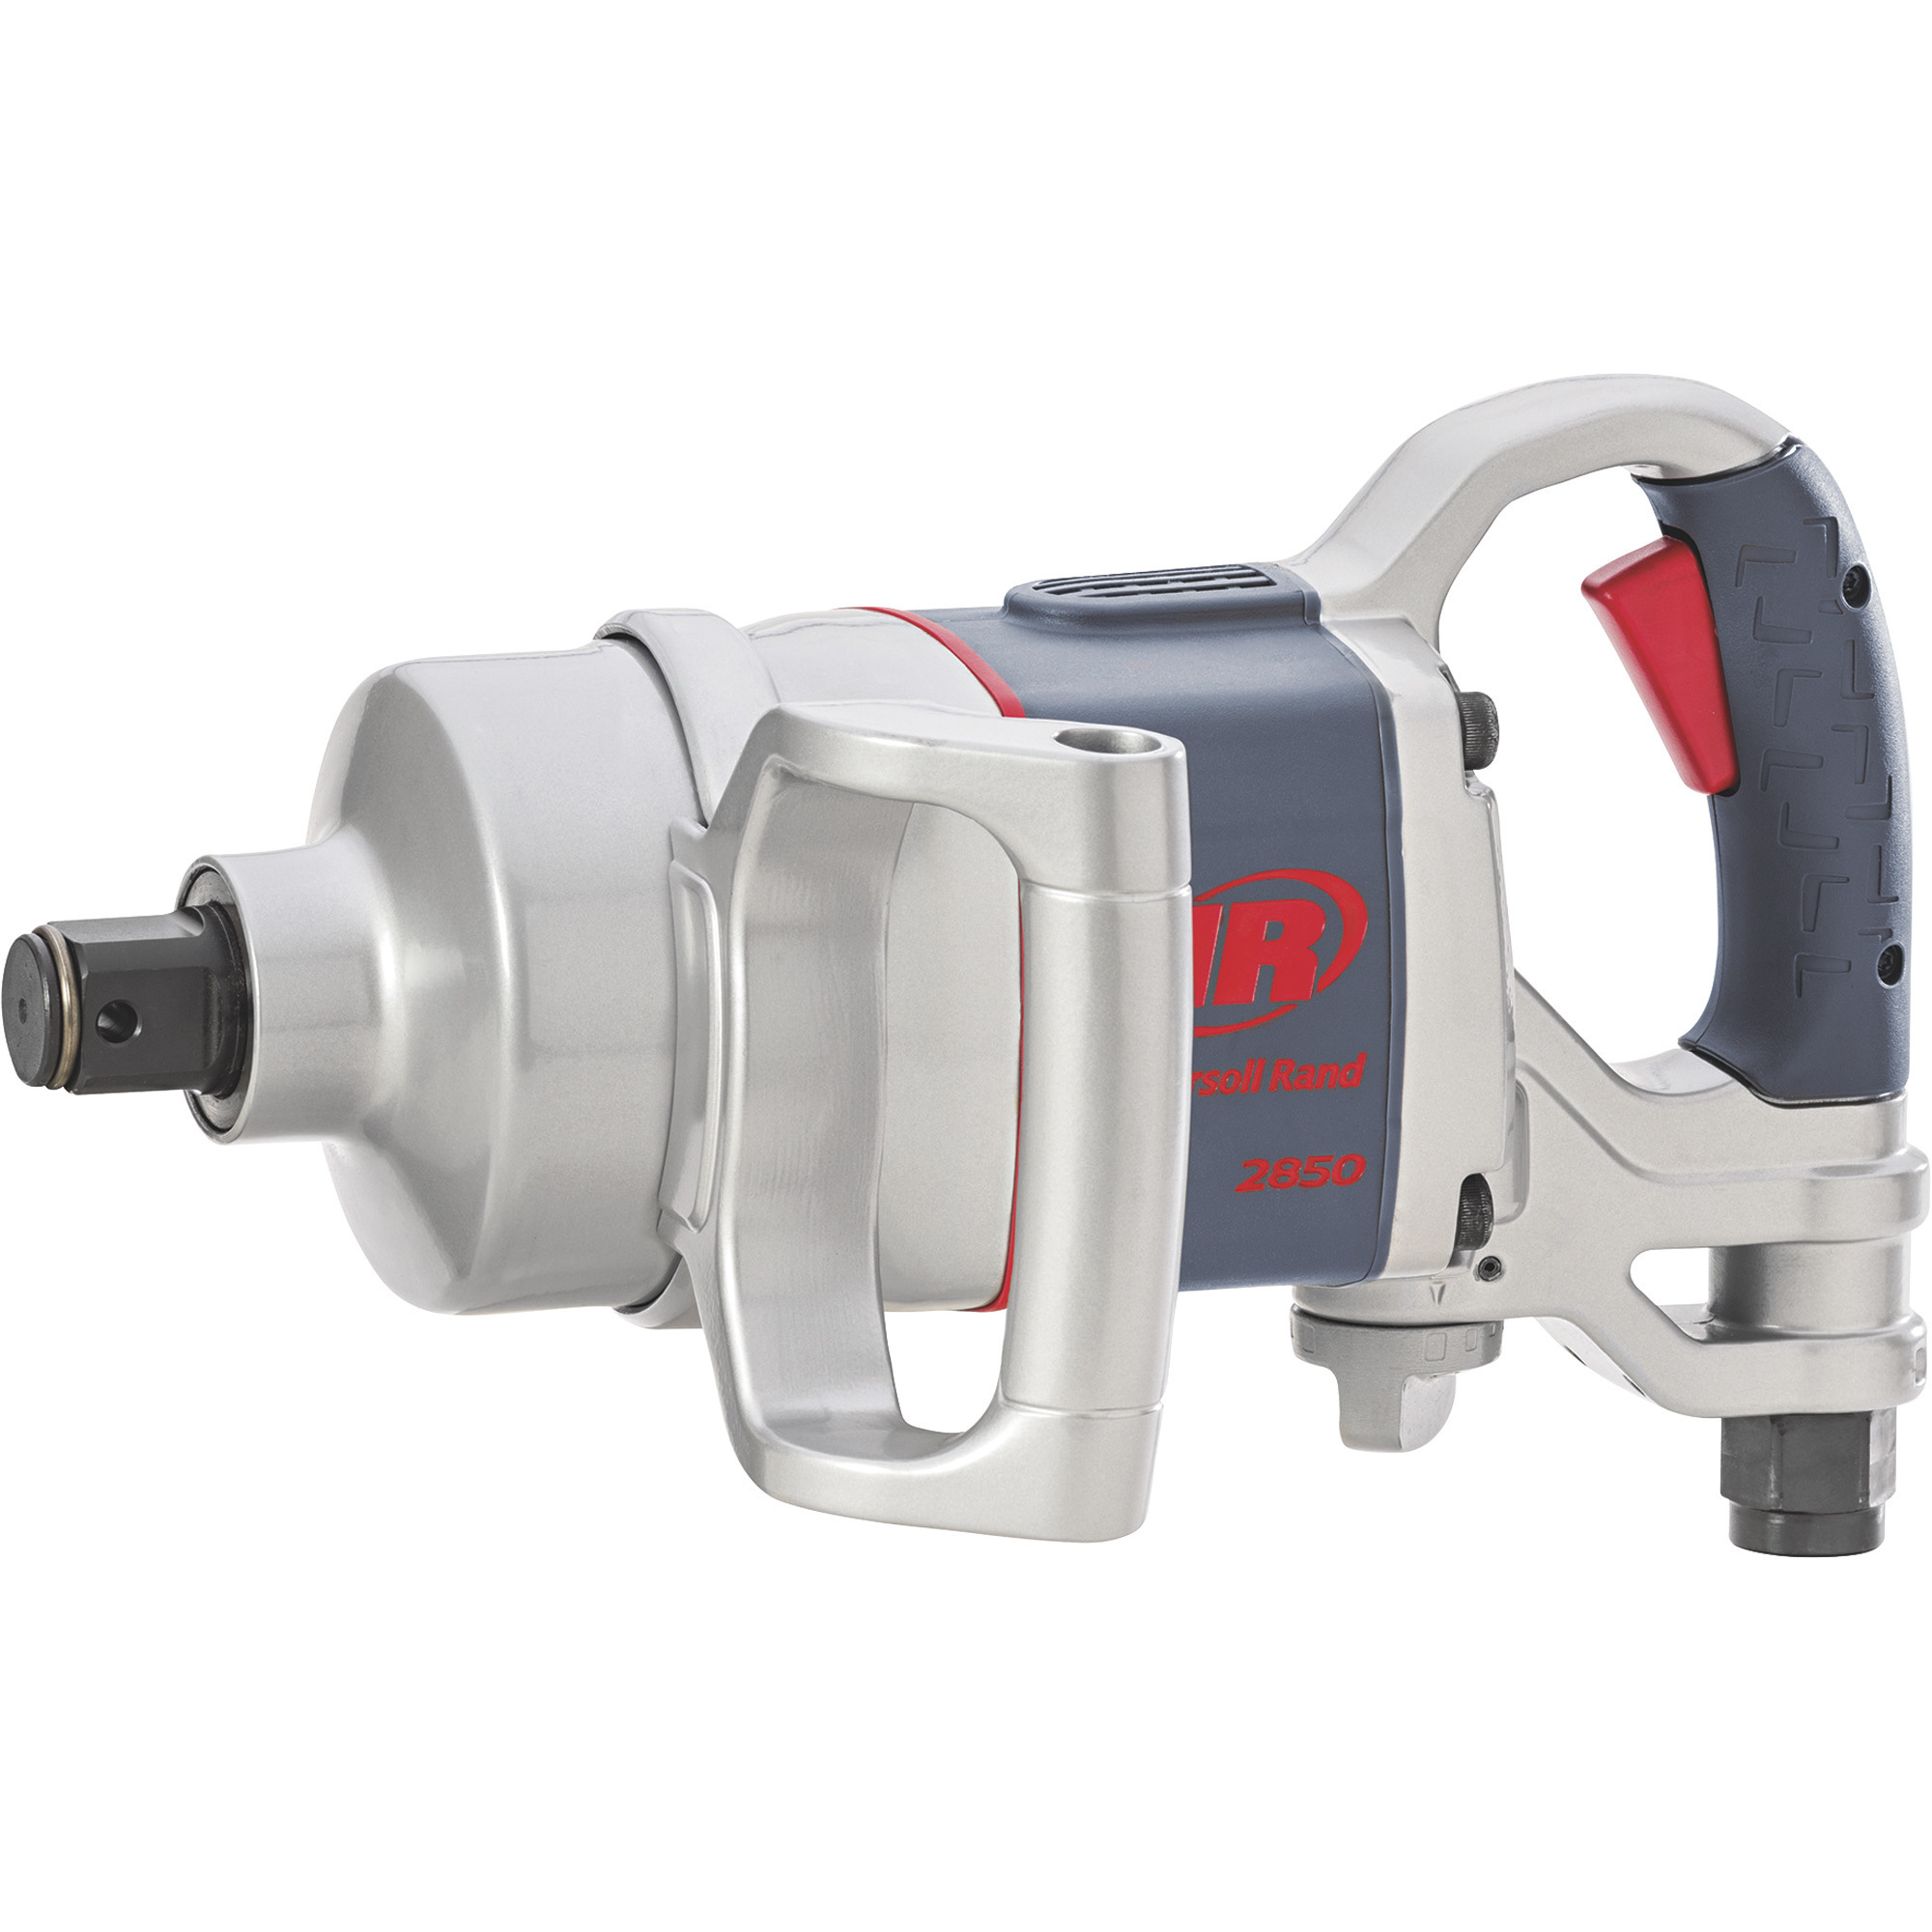 Ingersoll Rand Air Impact Wrench, 1Inch Drive, 2100 Ft.-Lbs. Torque, D-Handle, Model 2850MAX